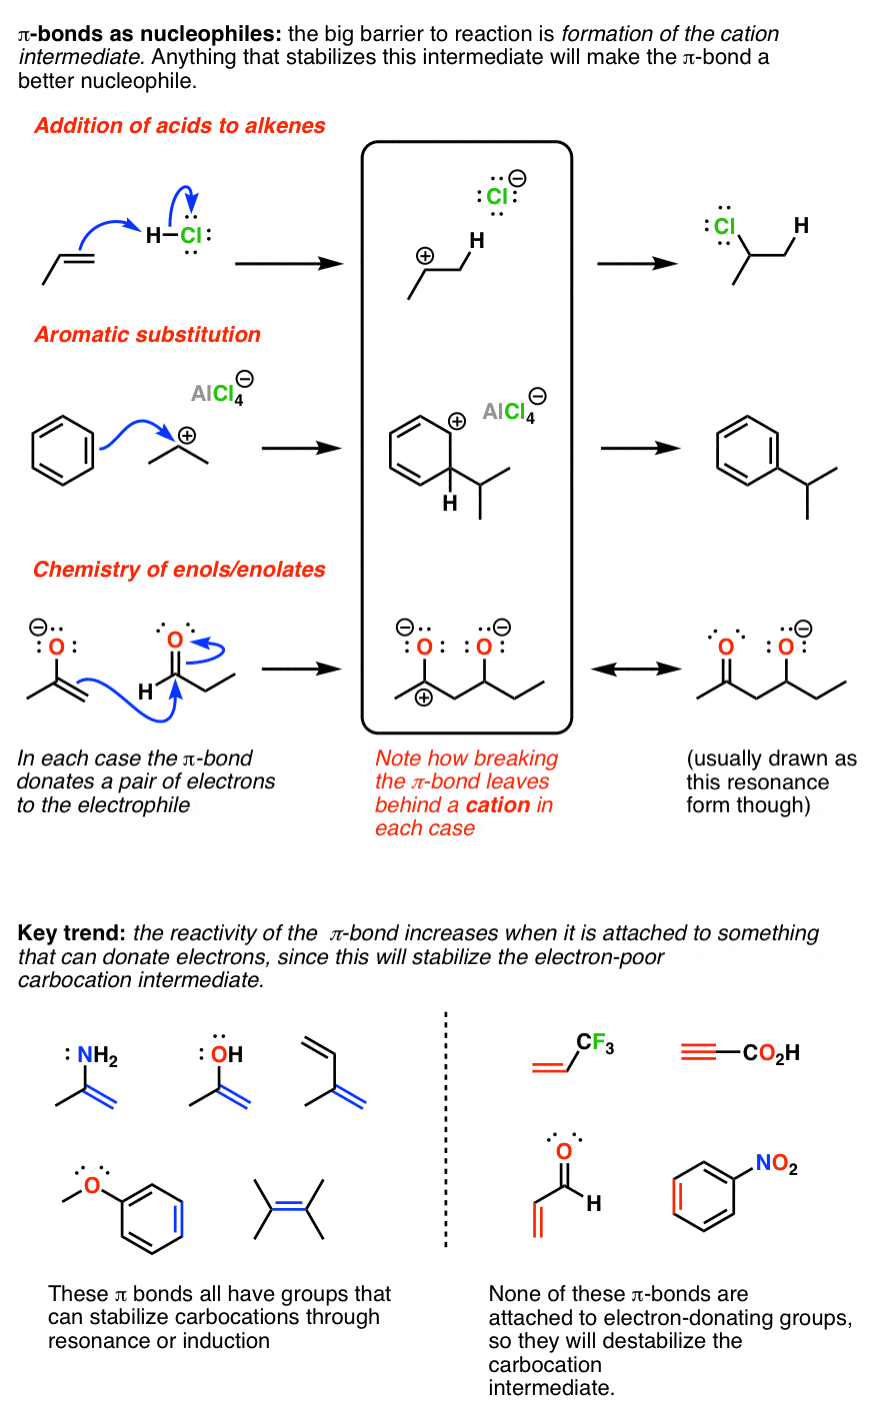 pi-bonds-can-be-nucleophiles-examples-in-addition-of-acids-to-alkenes-aromatic-substitution-enols-and-enolates